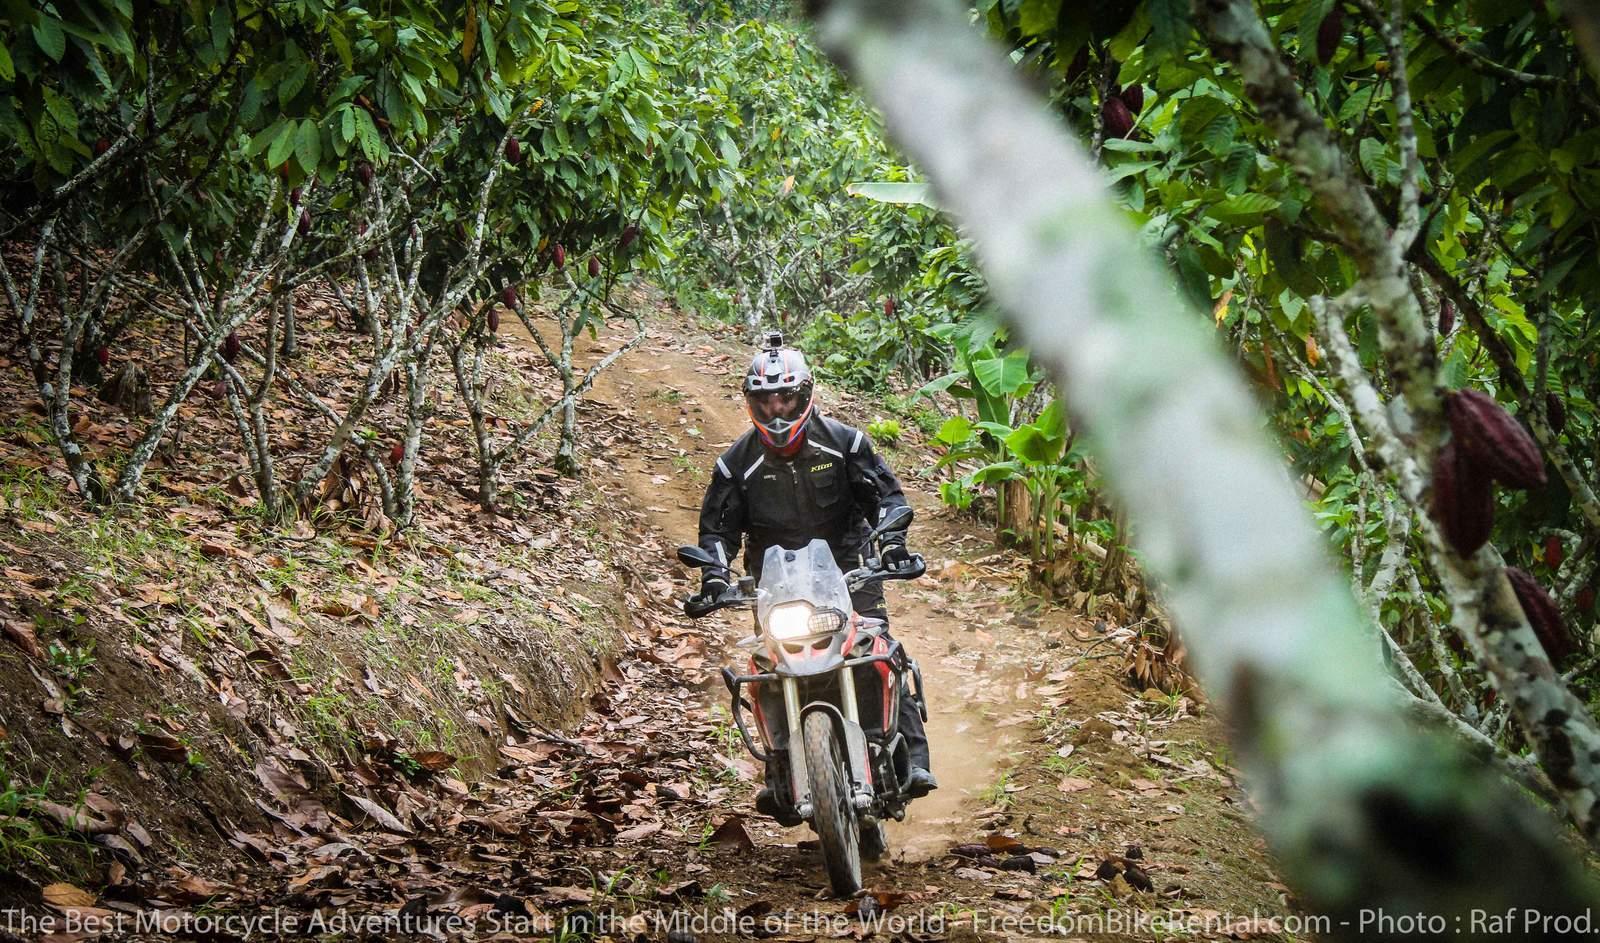 Offroad Motorcycling through chocolate plantation